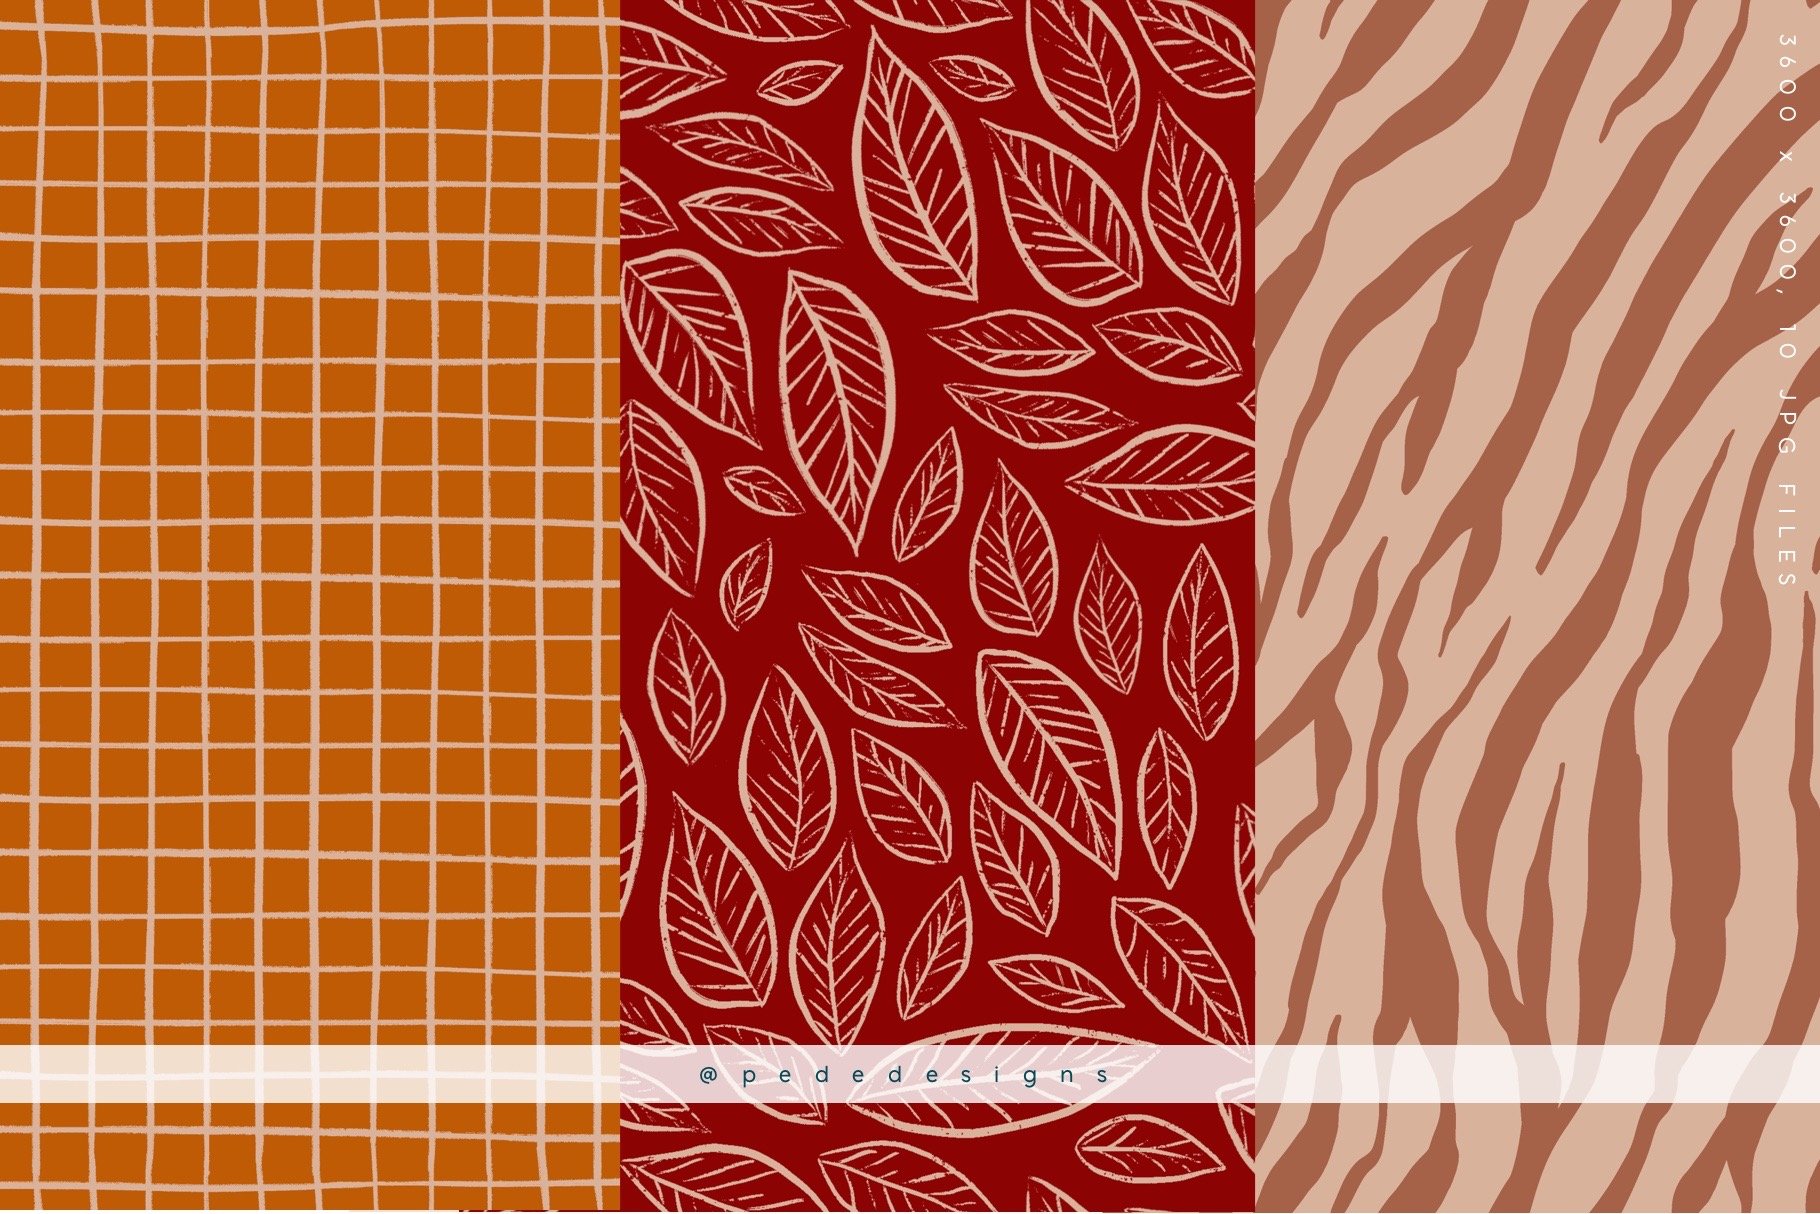 Warm autumn colors with the different prints.